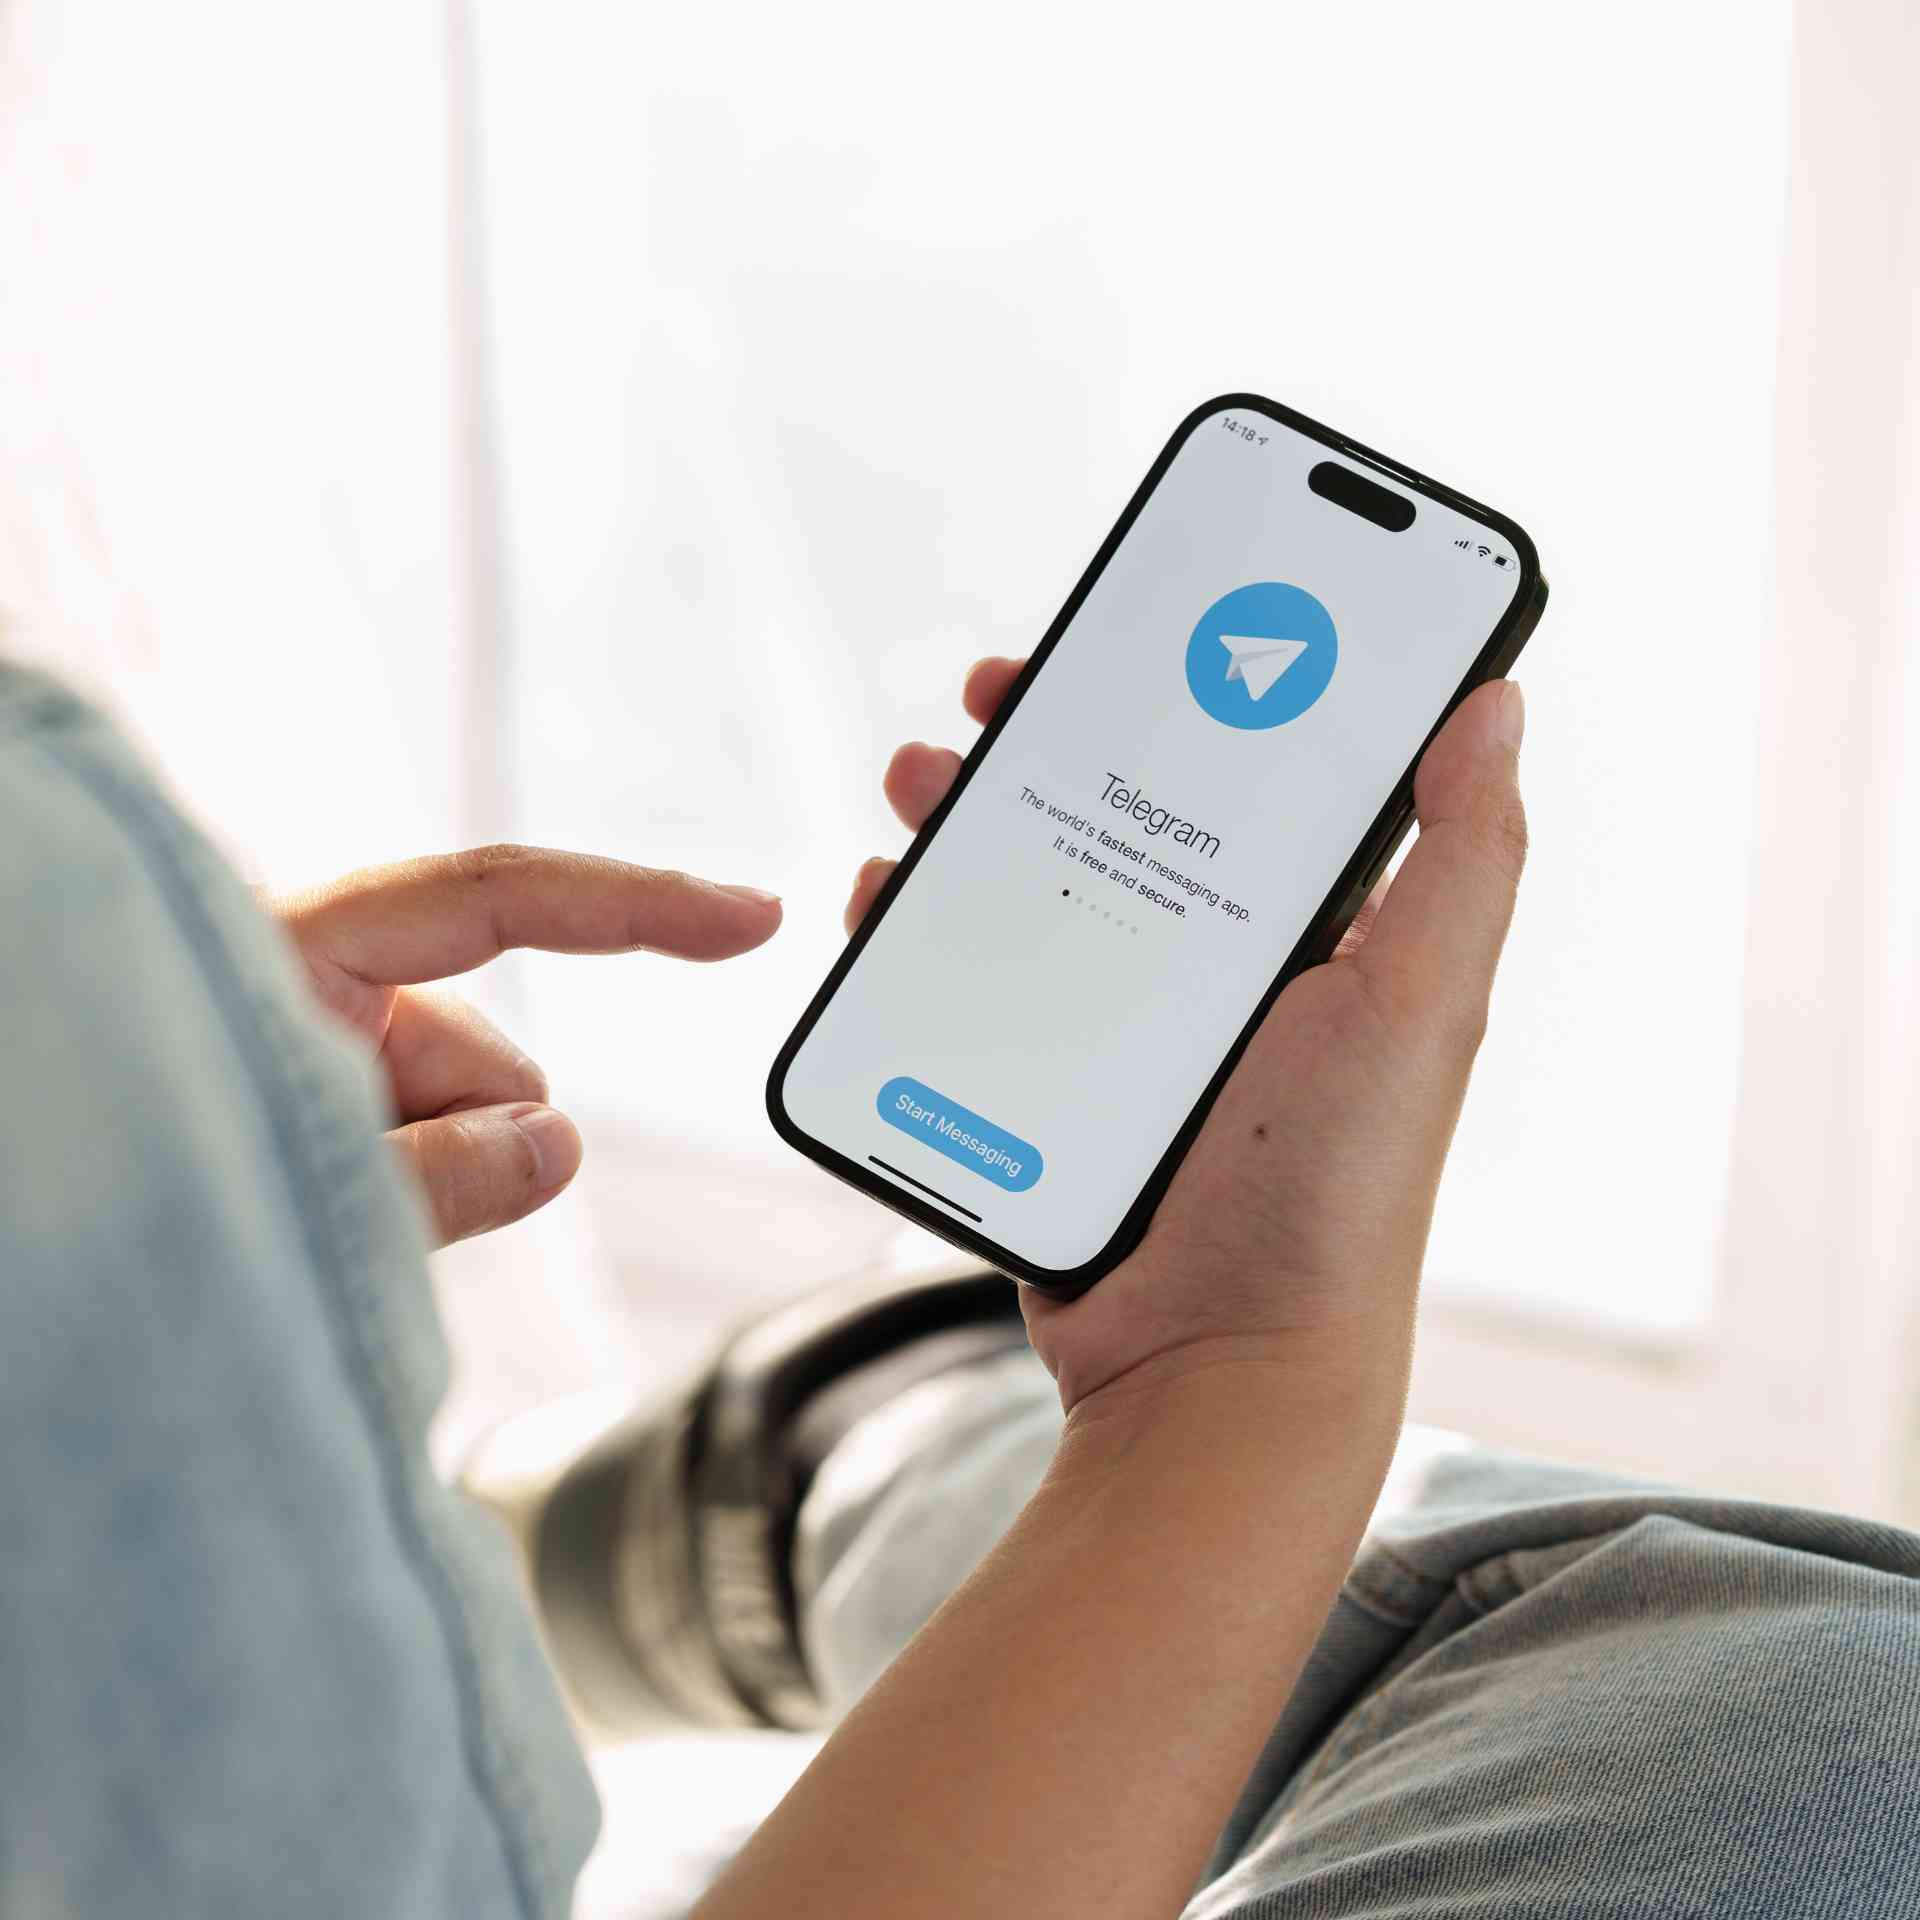 Take Your Business to the Next Level with Telegram’s Personal to Business Account Conversion Option